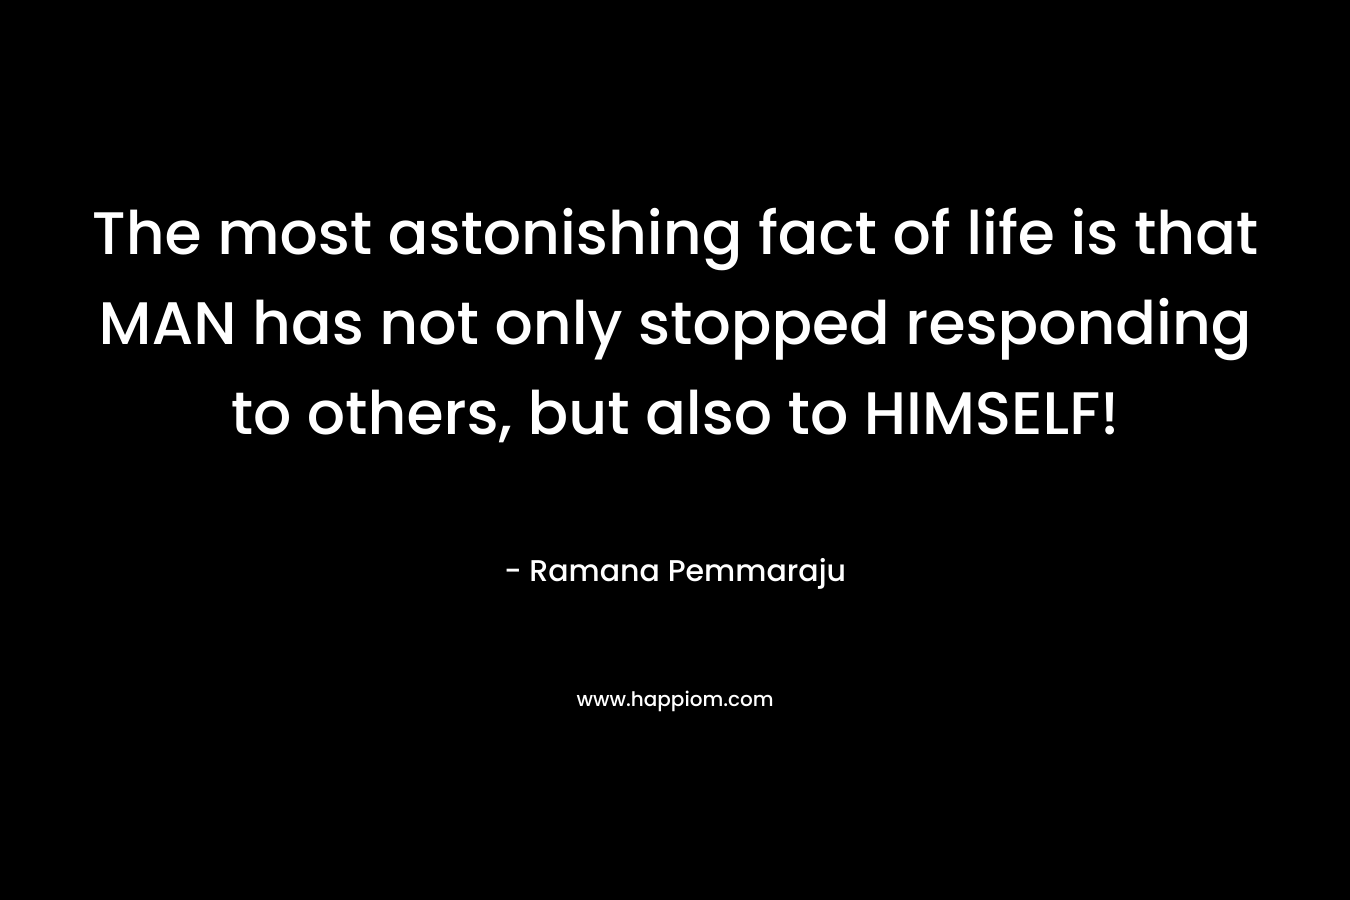 The most astonishing fact of life is that MAN has not only stopped responding to others, but also to HIMSELF! – Ramana Pemmaraju